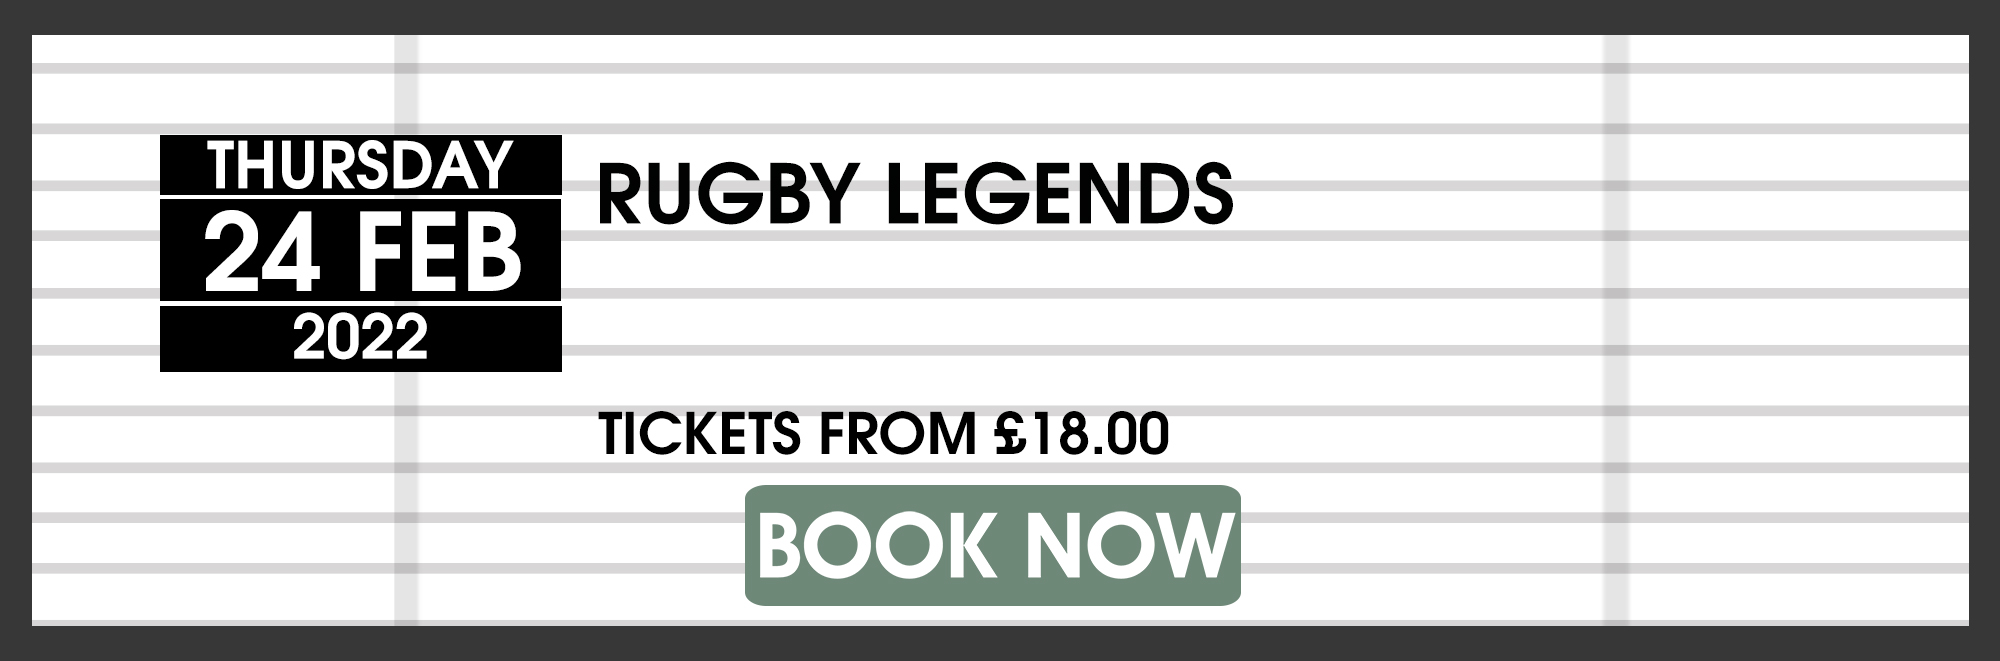 24.02.22 RUGBYBOOK NOW